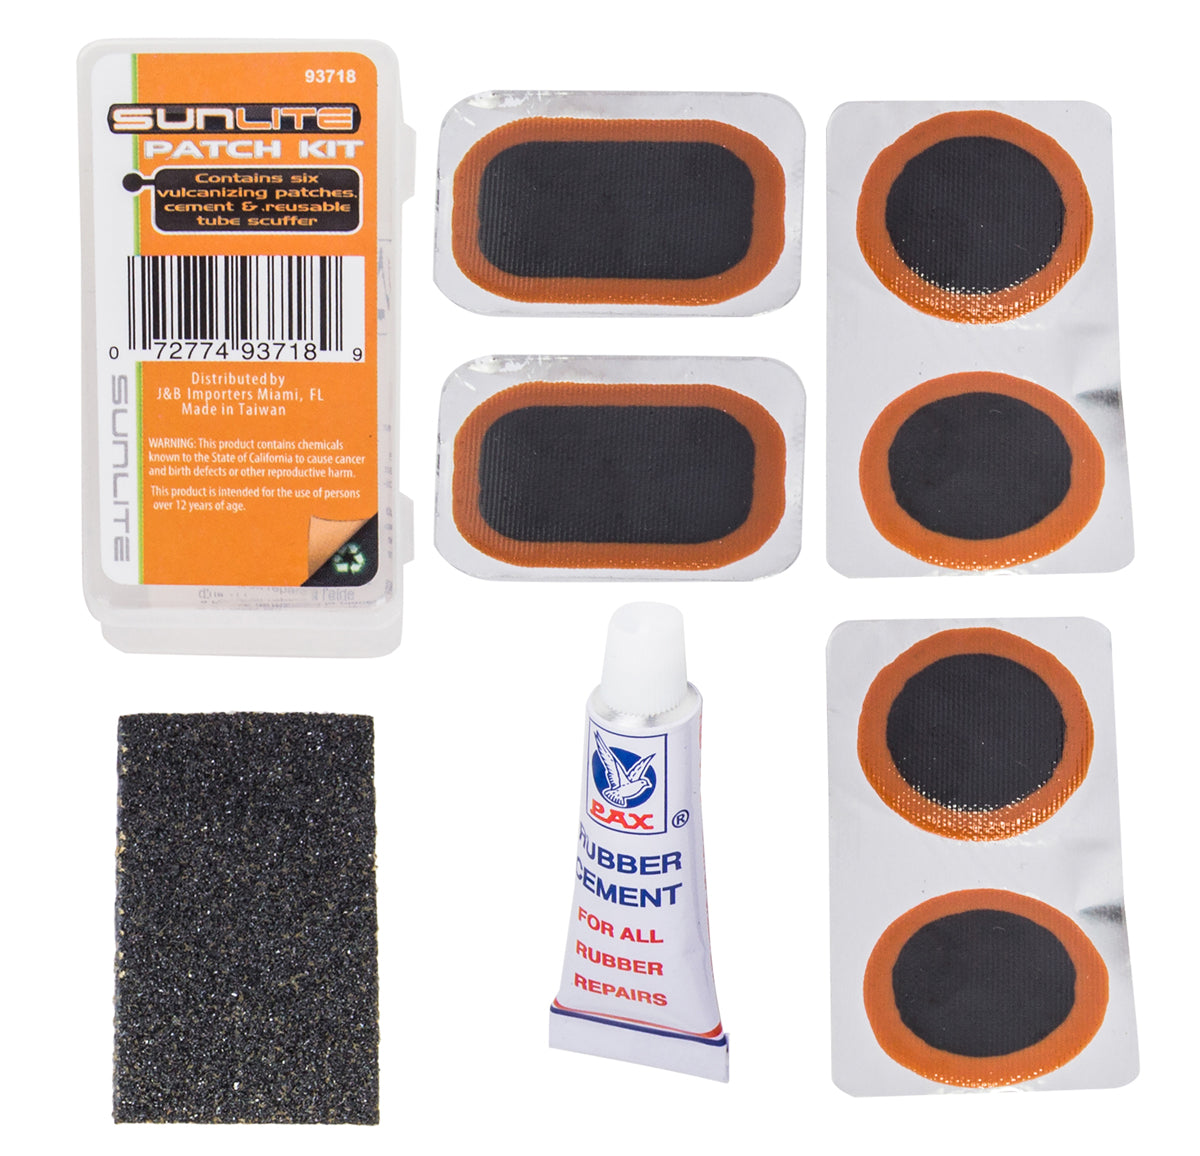 SUNLITE Road Bicycle Tube Patch Kit w/ 6 patches, cement and scuffer